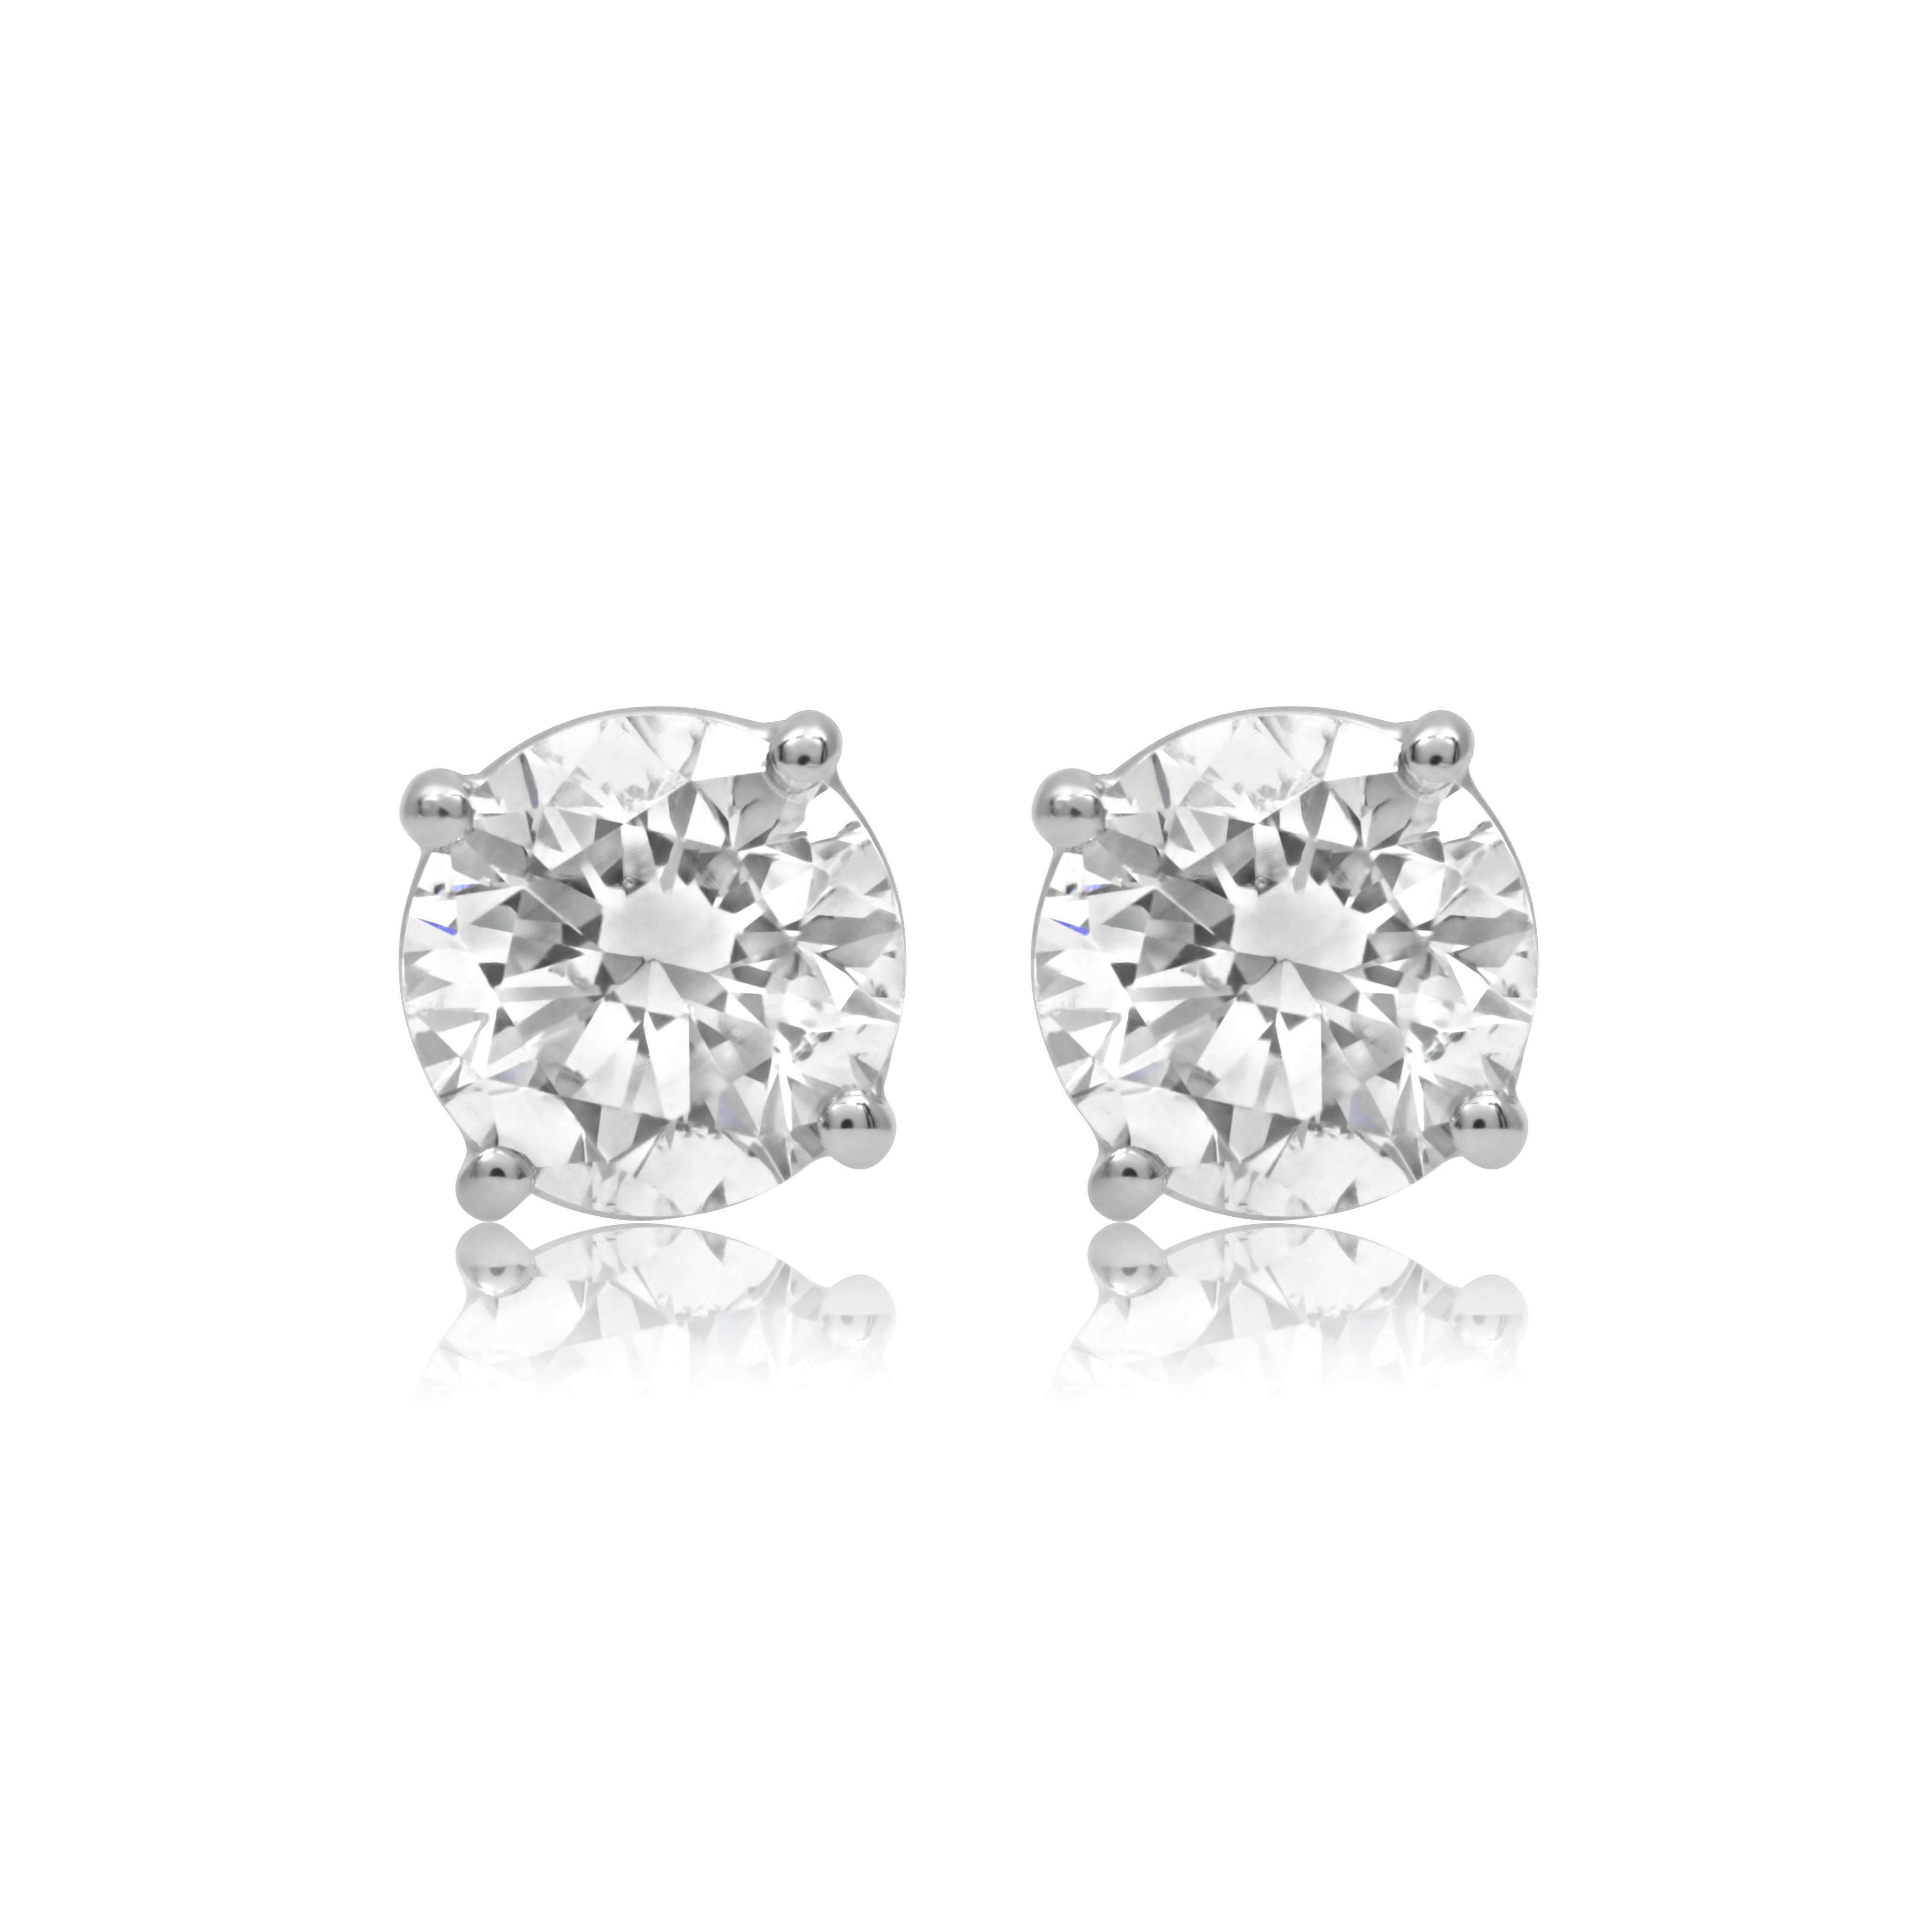 Diana M. 4.55cts  4 prong Diamond studs HI Color SI Clarity screw Backs   In New Condition For Sale In New York, NY